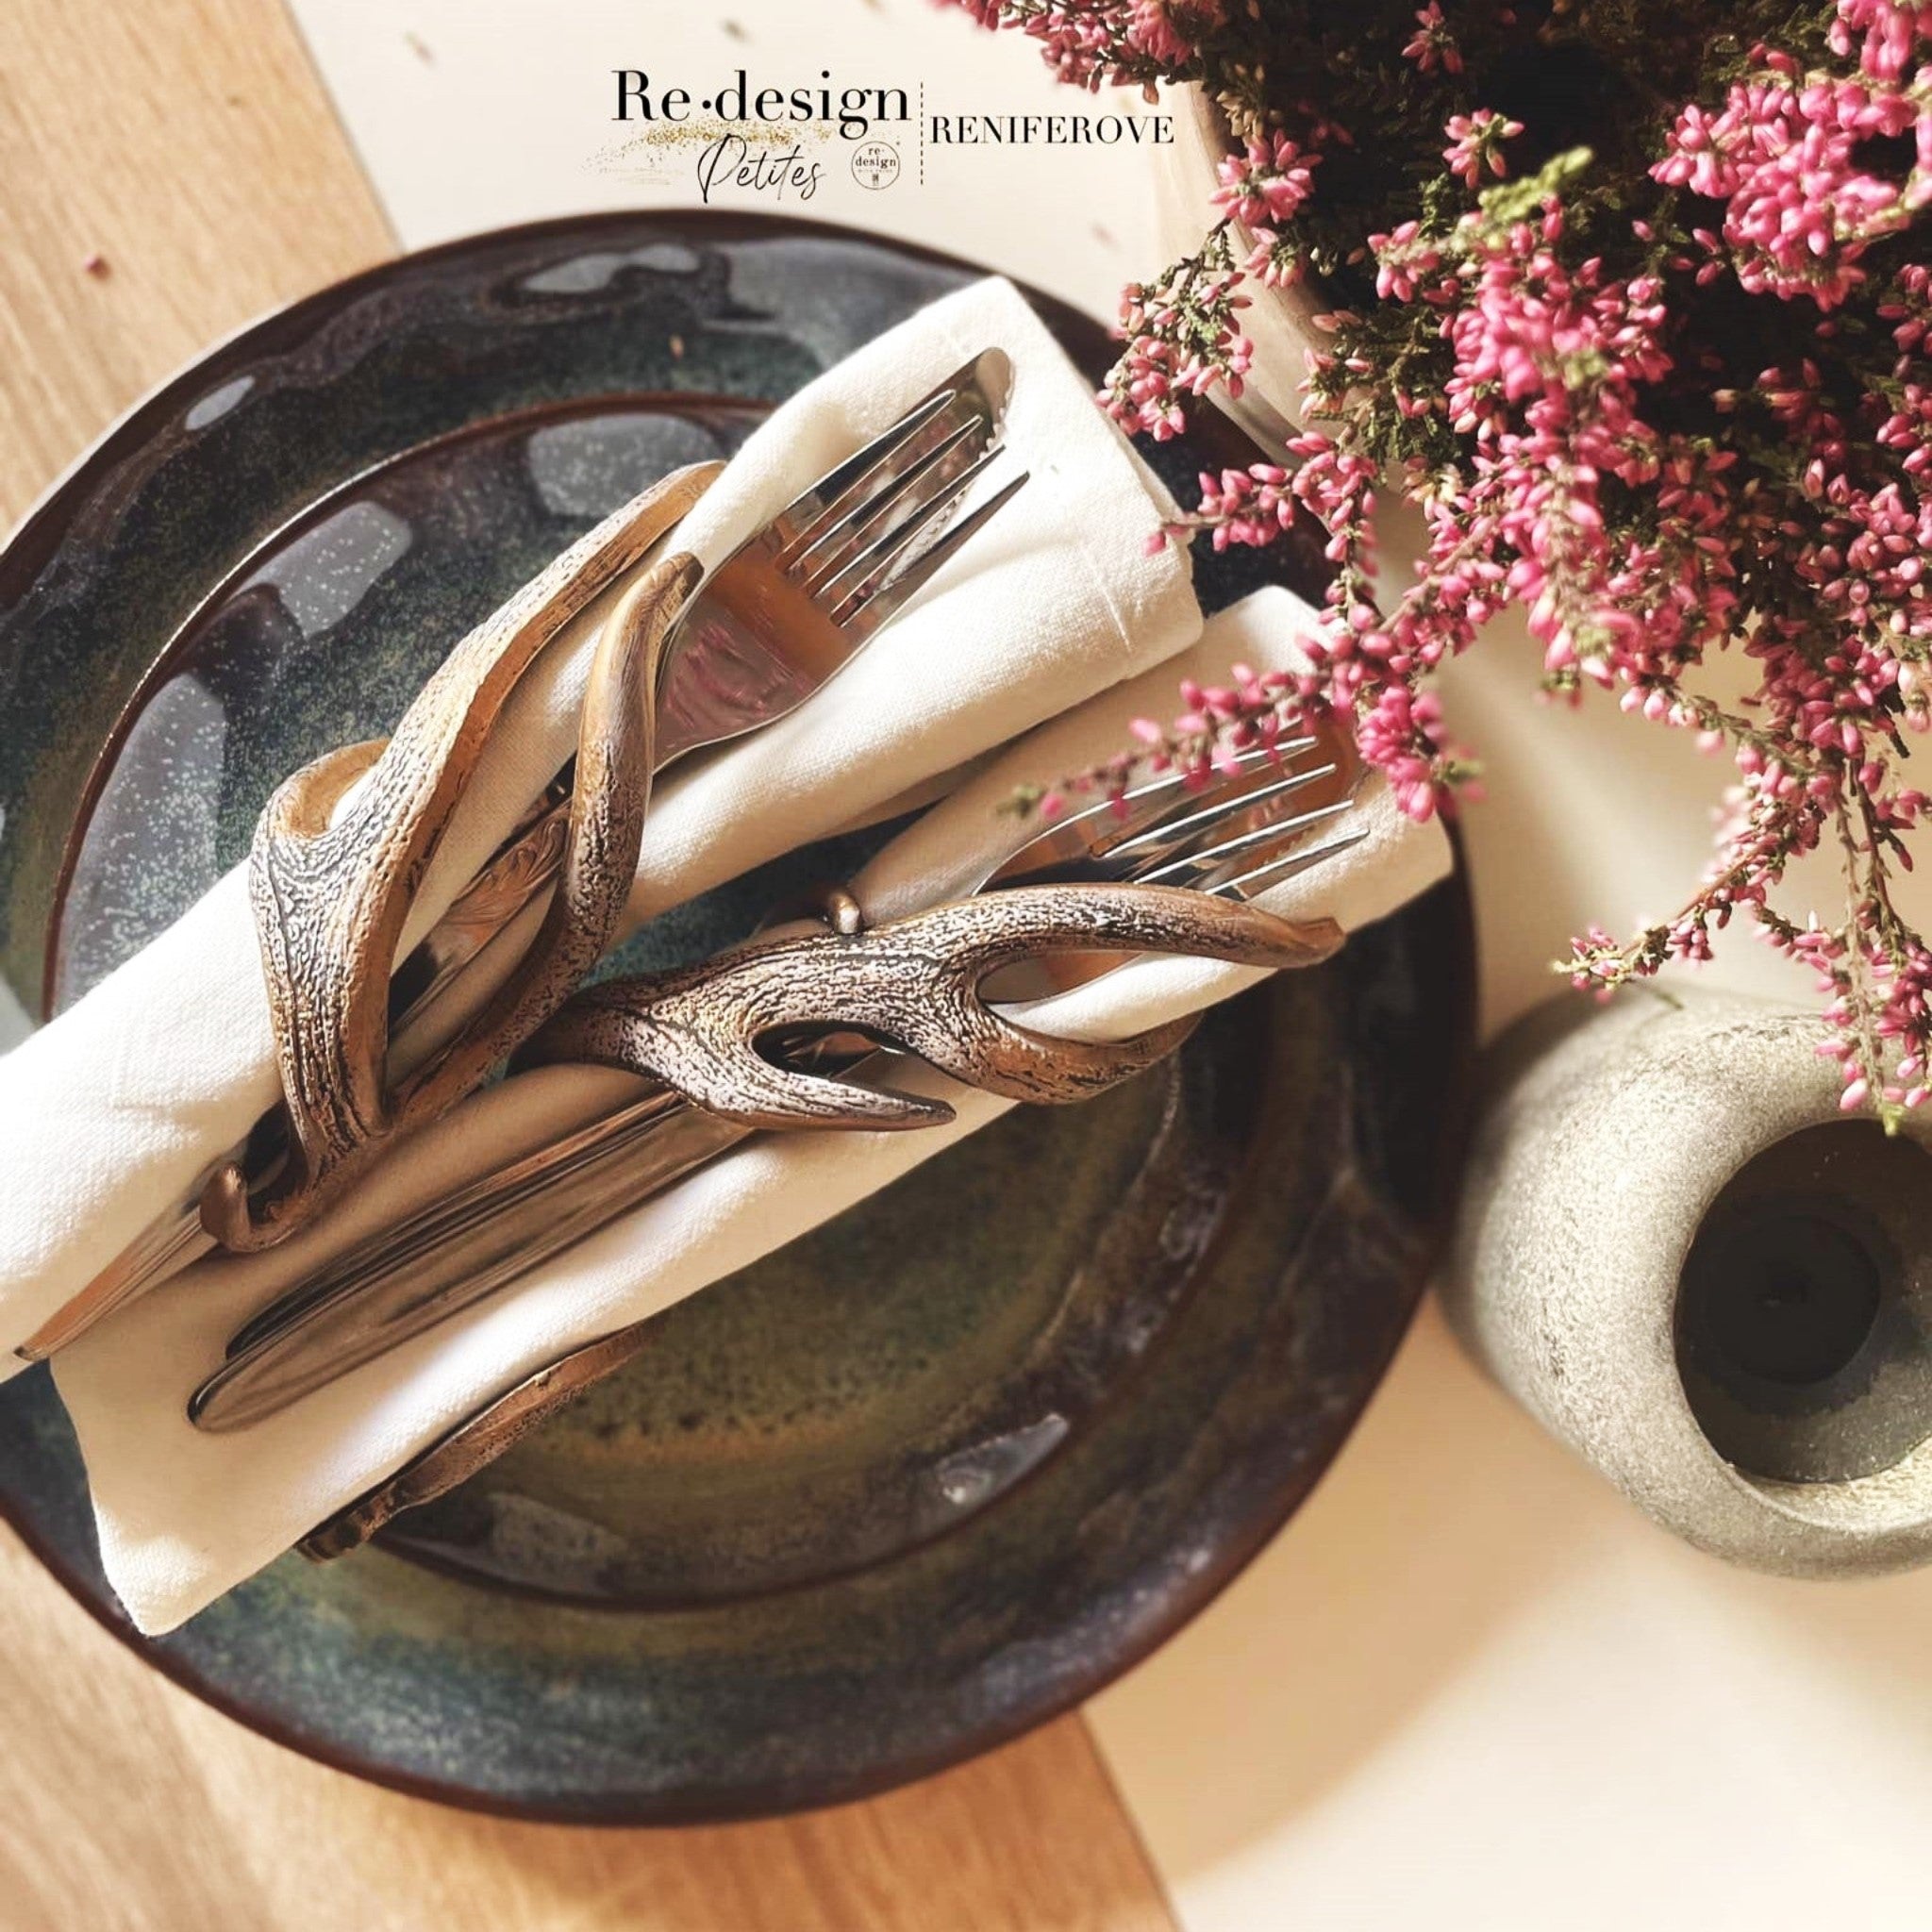 Napkin holders created by Reniferove using the antlers from ReDesign with Prima's Loggers Lodge silicone moulds are featured holding a fork, butter knife, and napkin on a dark ceramic plate.